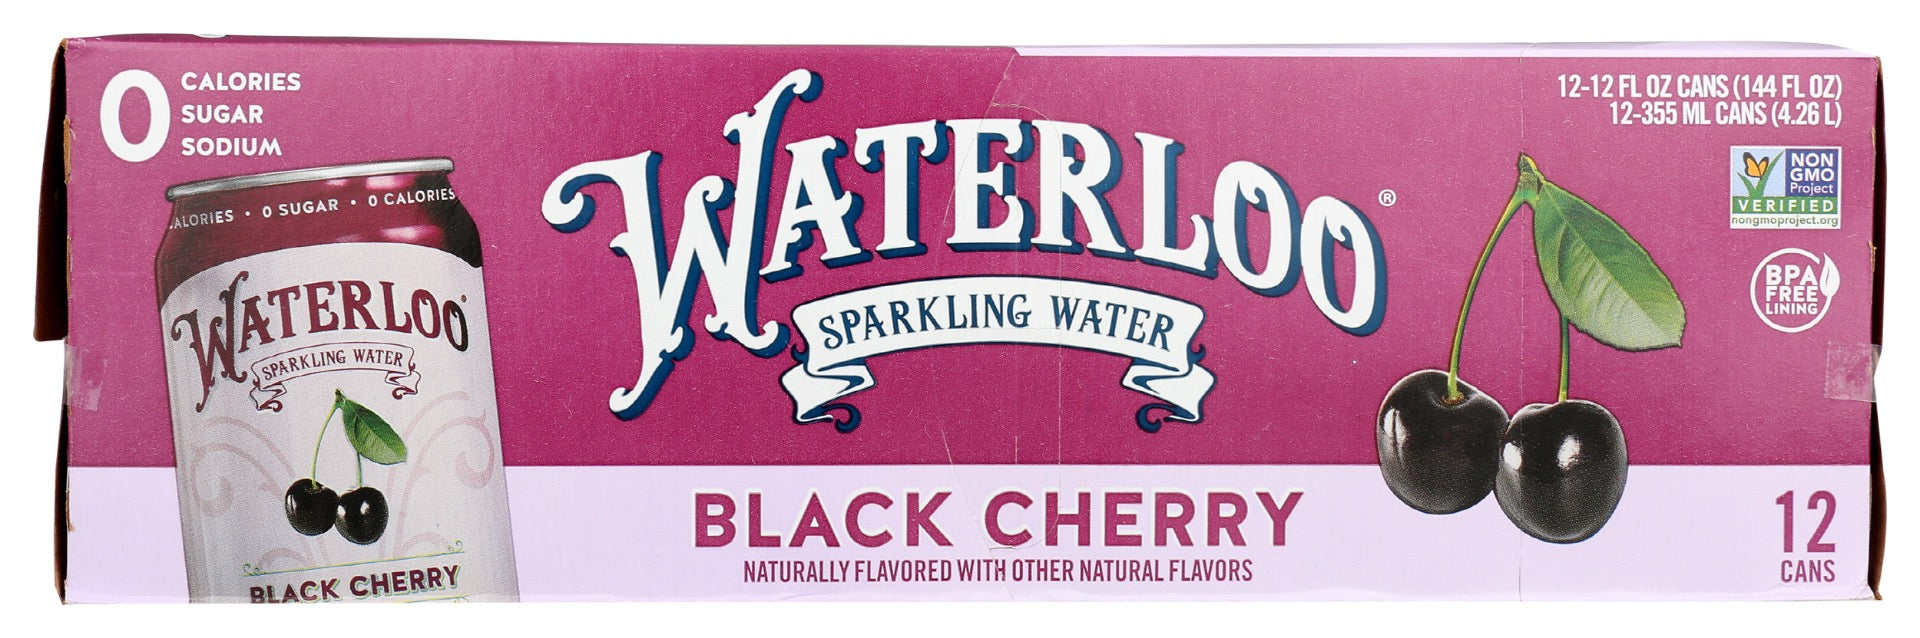 WATERLOO SPARKLING WATER: Water Sprk Blk Chrry 12Pk, 144 fo